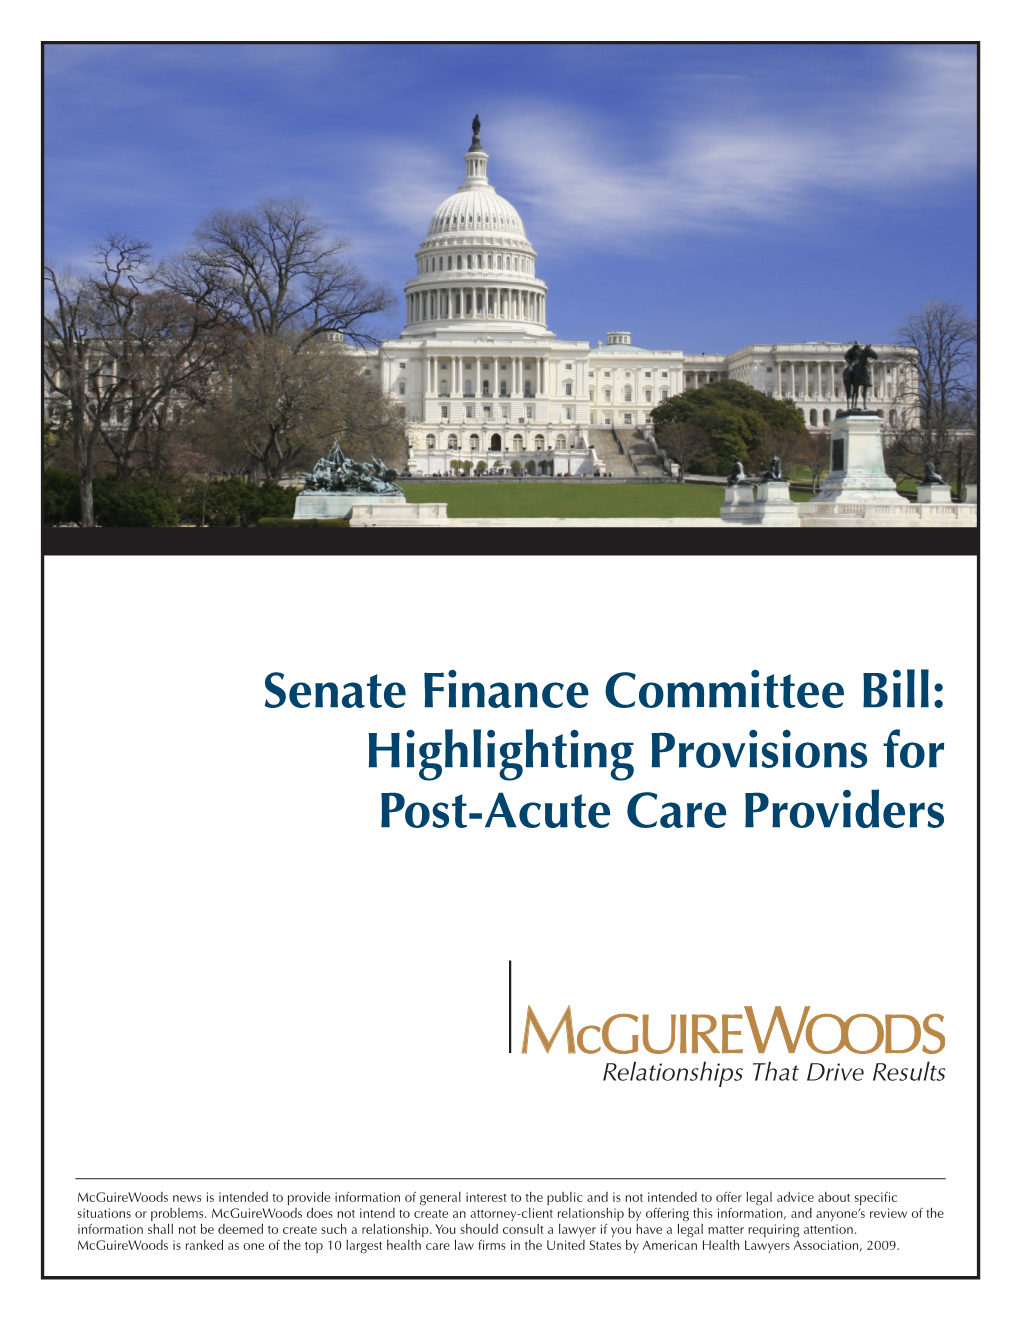 Senate Finance Committee Bill: Highlighting Provisions for Post-Acute Care Providers